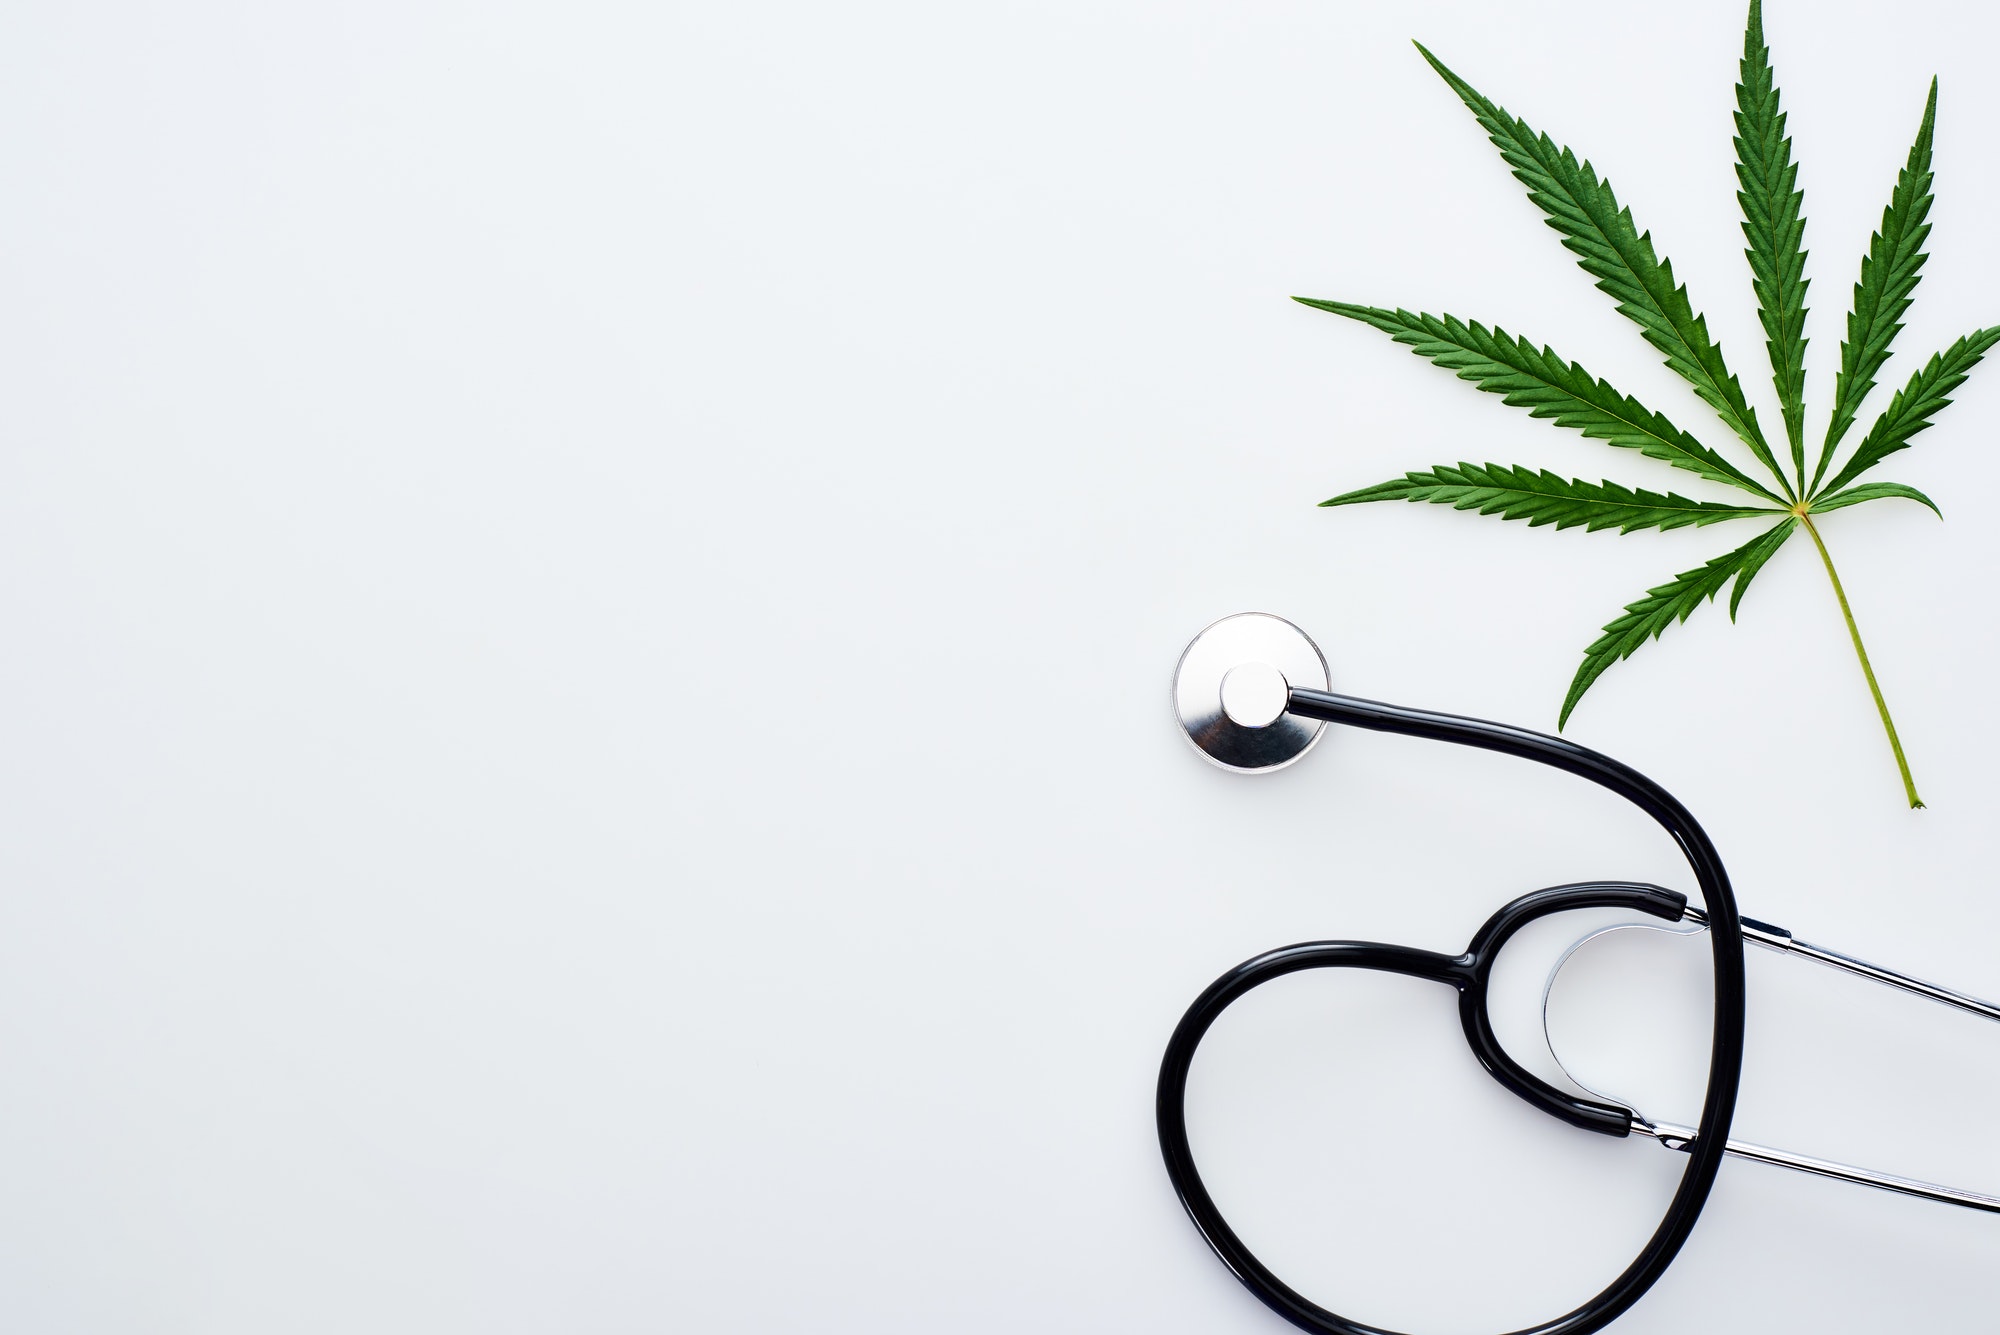 top view of medical cannabis leaf near stethoscope on white background